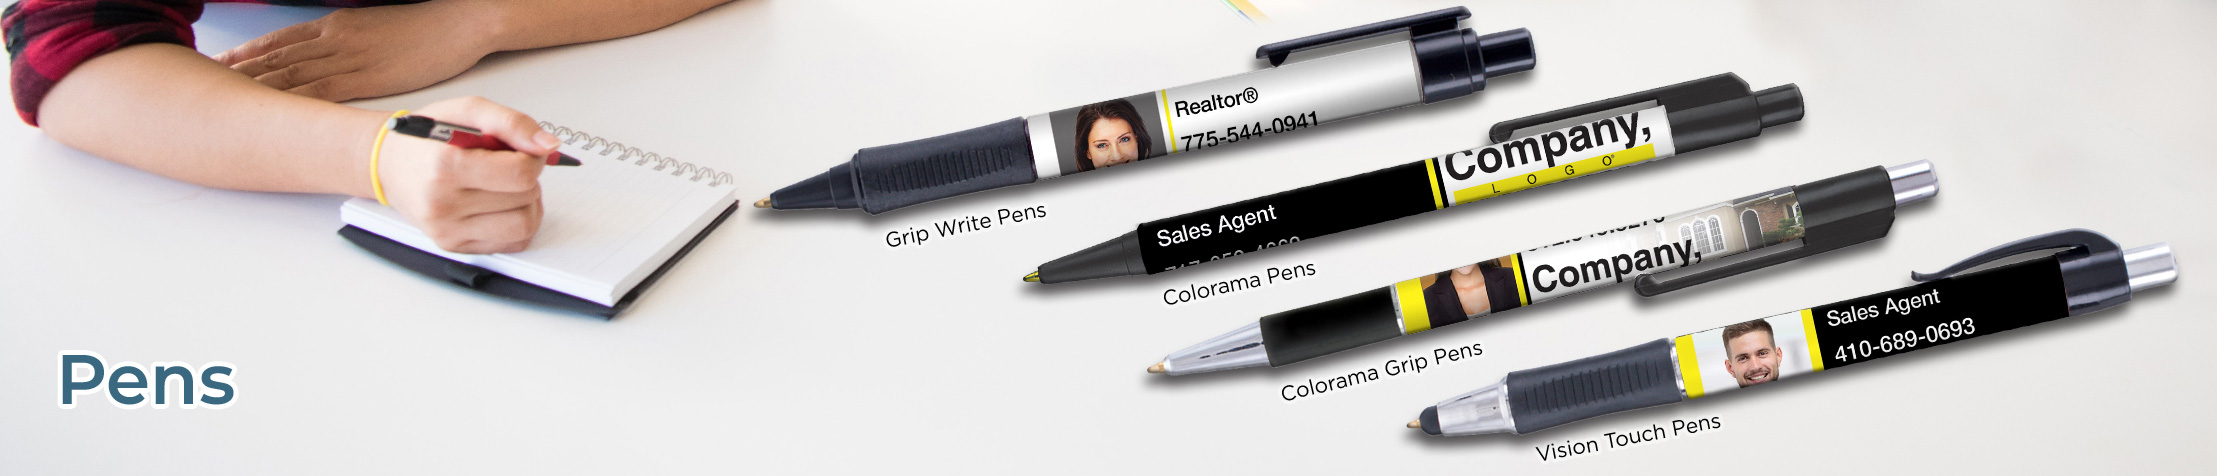 Weichert Real Estate Personalized Pens - promotional products: Grip Write Pens, Colorama Pens, Vision Touch Pens, and Colorama Grip Pens | BestPrintBuy.com